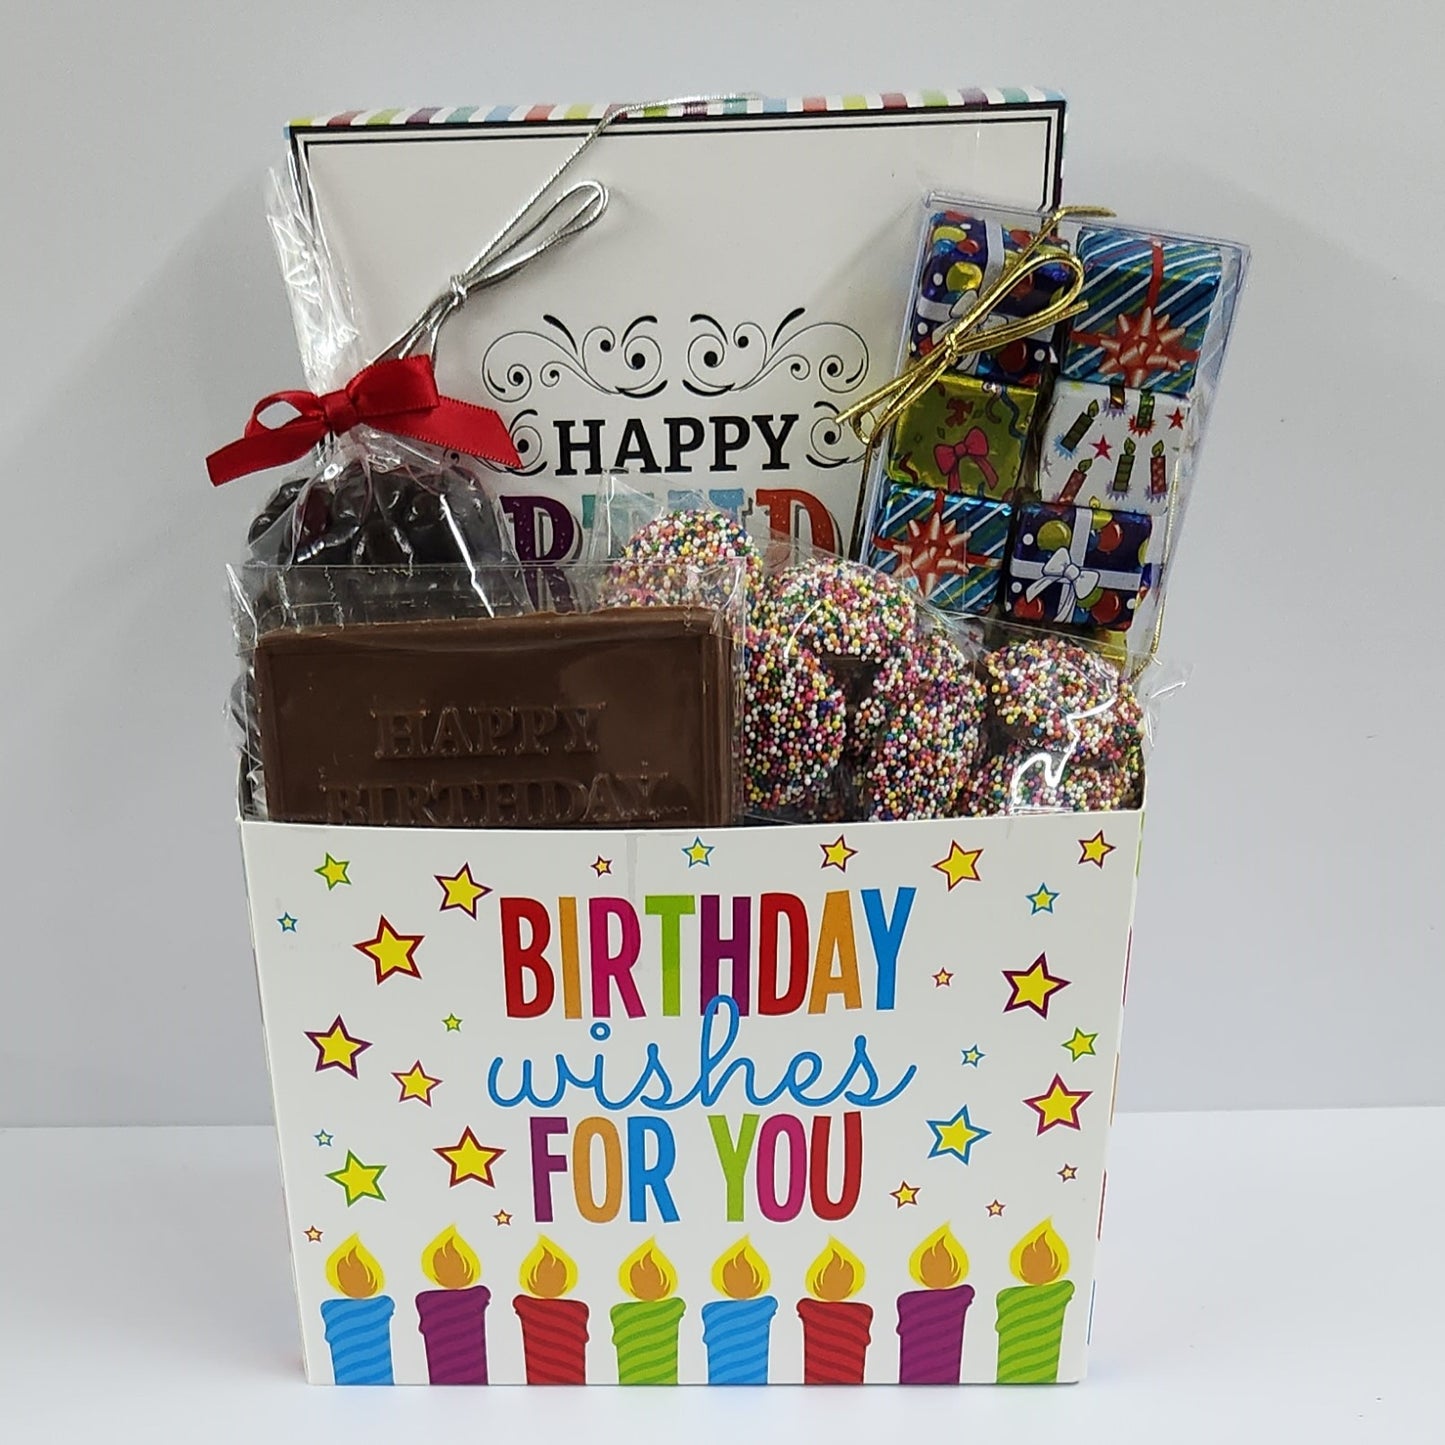 Birthday Wishes Gift Basket includes foiled milk chocolate presents, milk chocolate nonpareils, dark chocolate-covered cranberries, milk chocolate birthday card and a 16-piece cream, caramels, meltaways, and truffle assortment